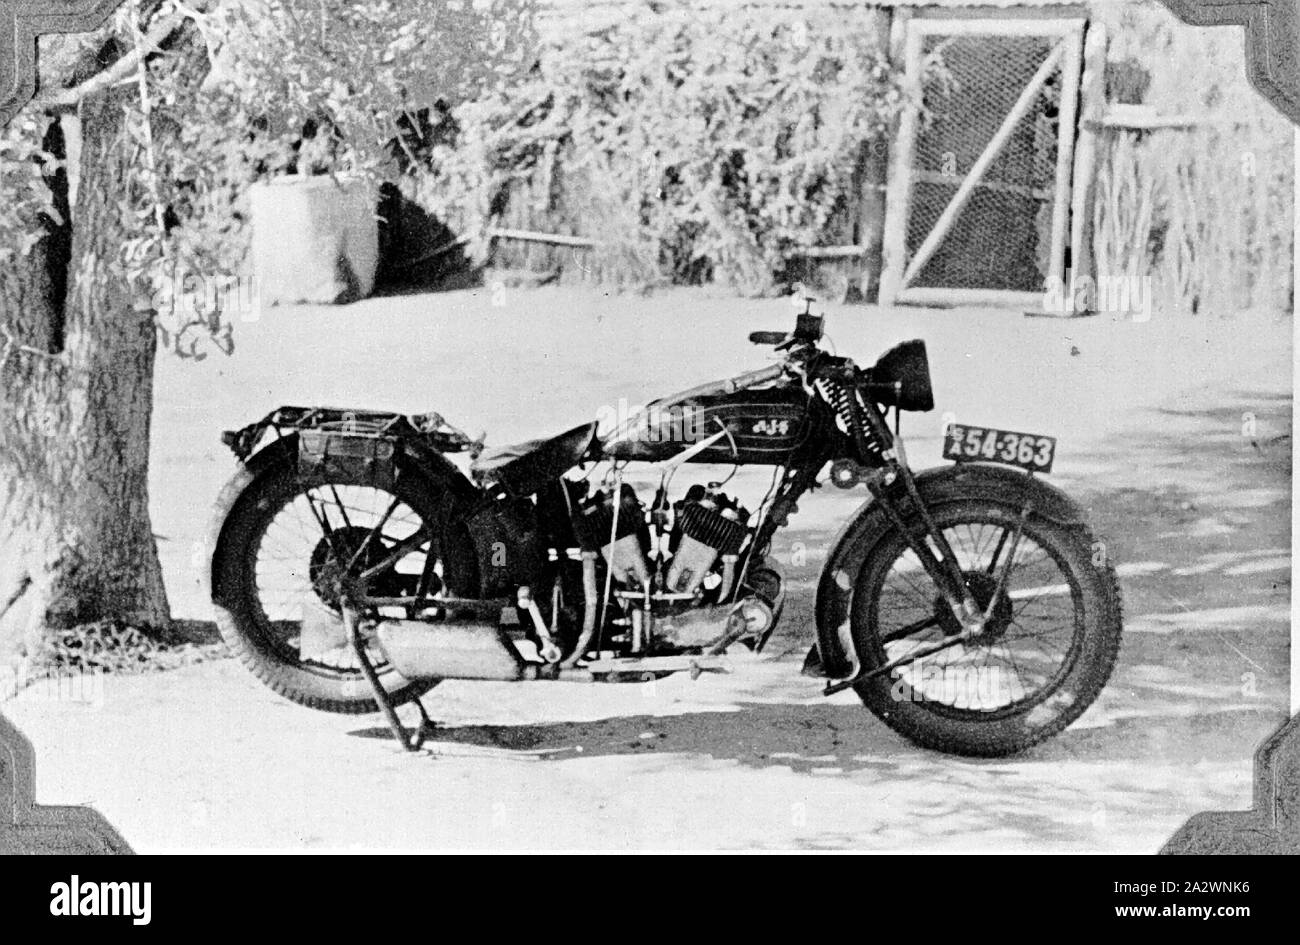 Negative - Henbury, Northern Territory, 1937, A AJS V-twin motorbike at 'Henbery' station. There is a brush covered building in the background Stock Photo